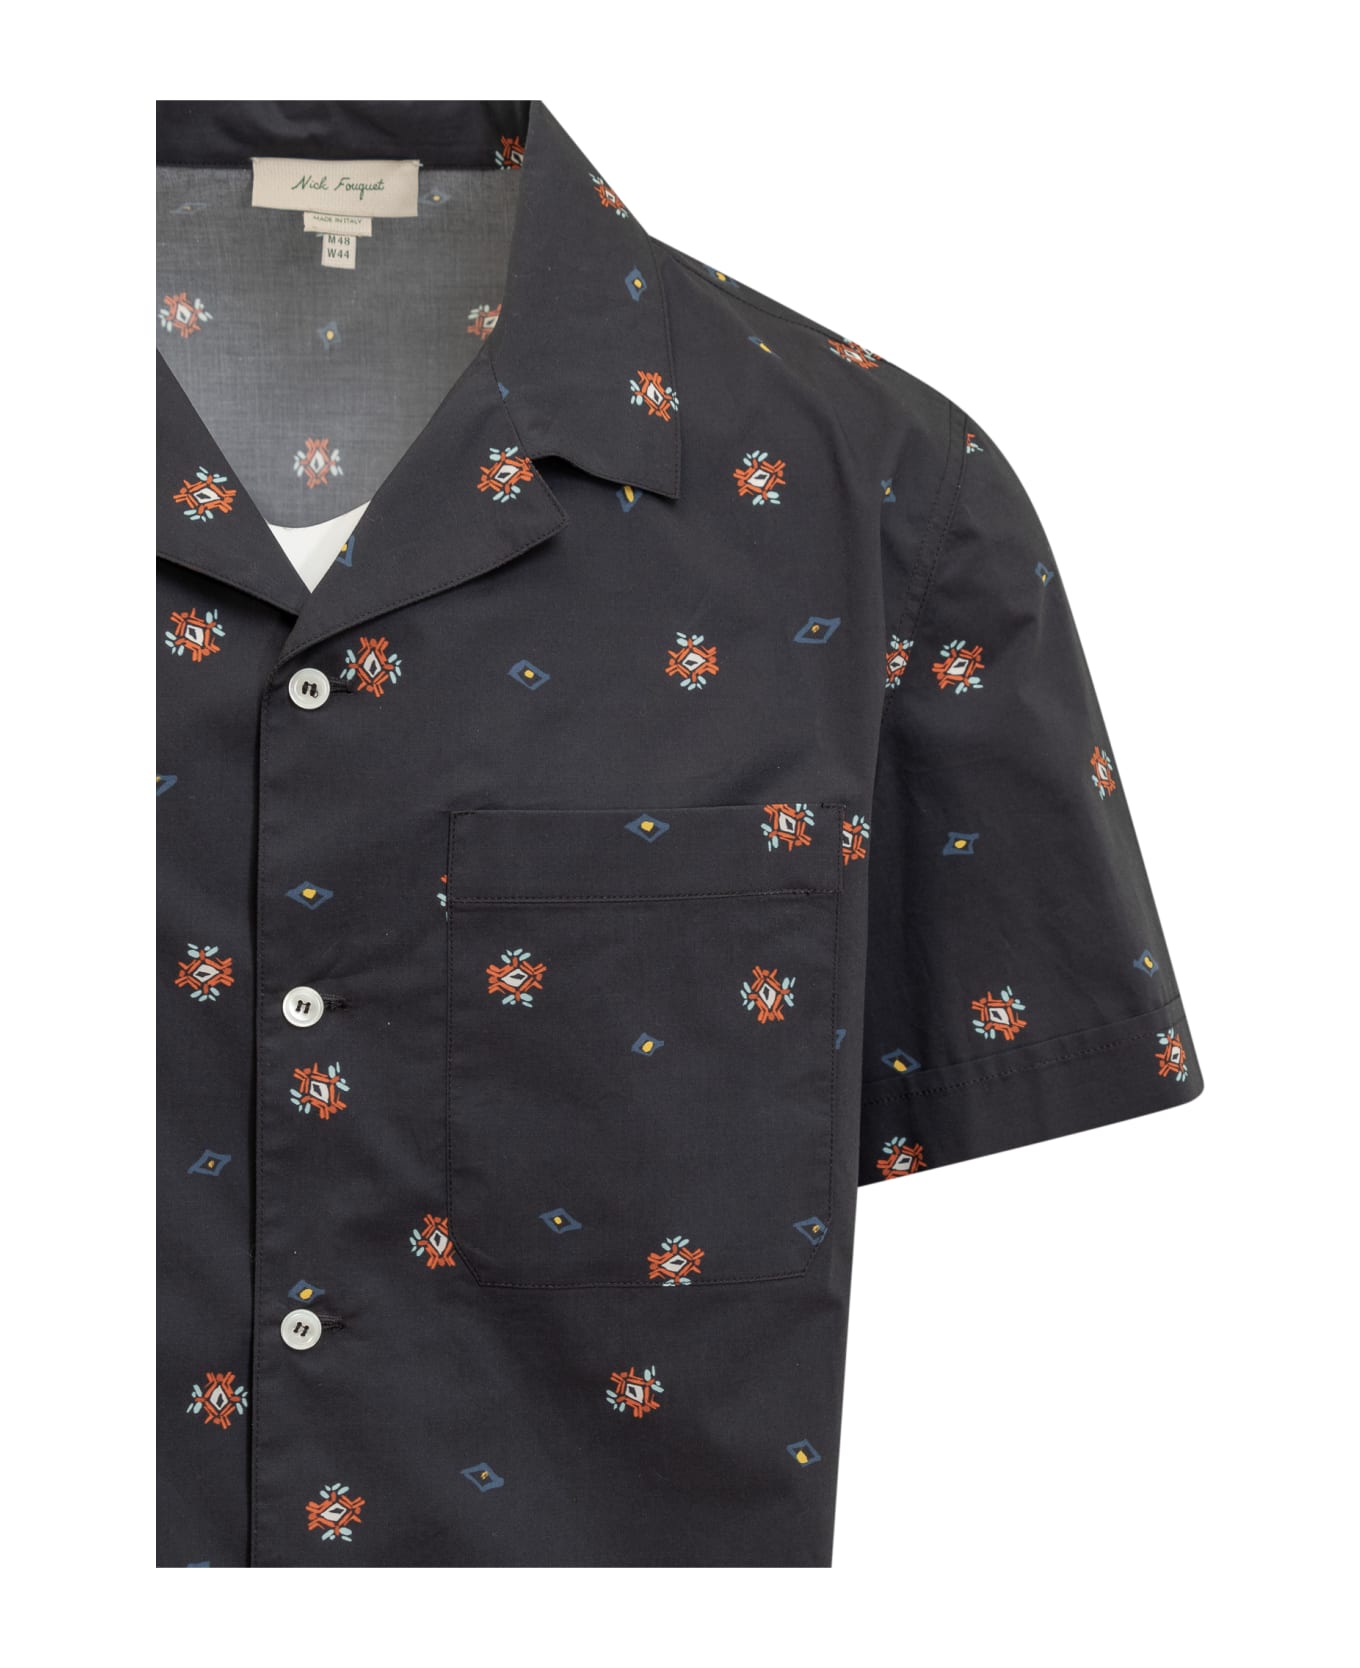 Nick Fouquet Shirt With Print - BLUE シャツ